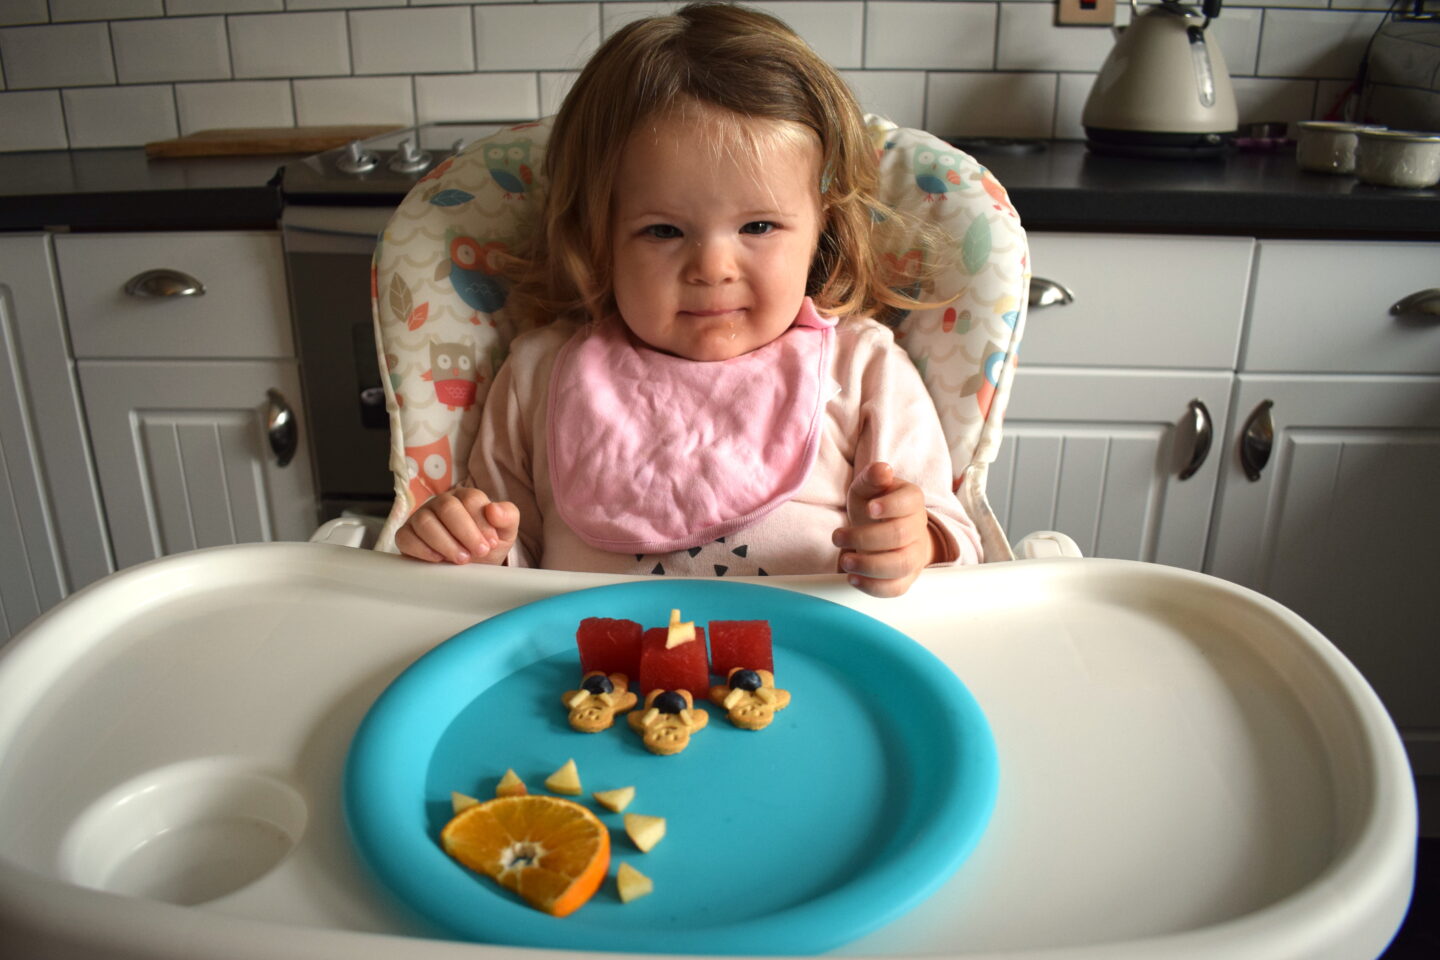 Making snack time more fun for toddlers